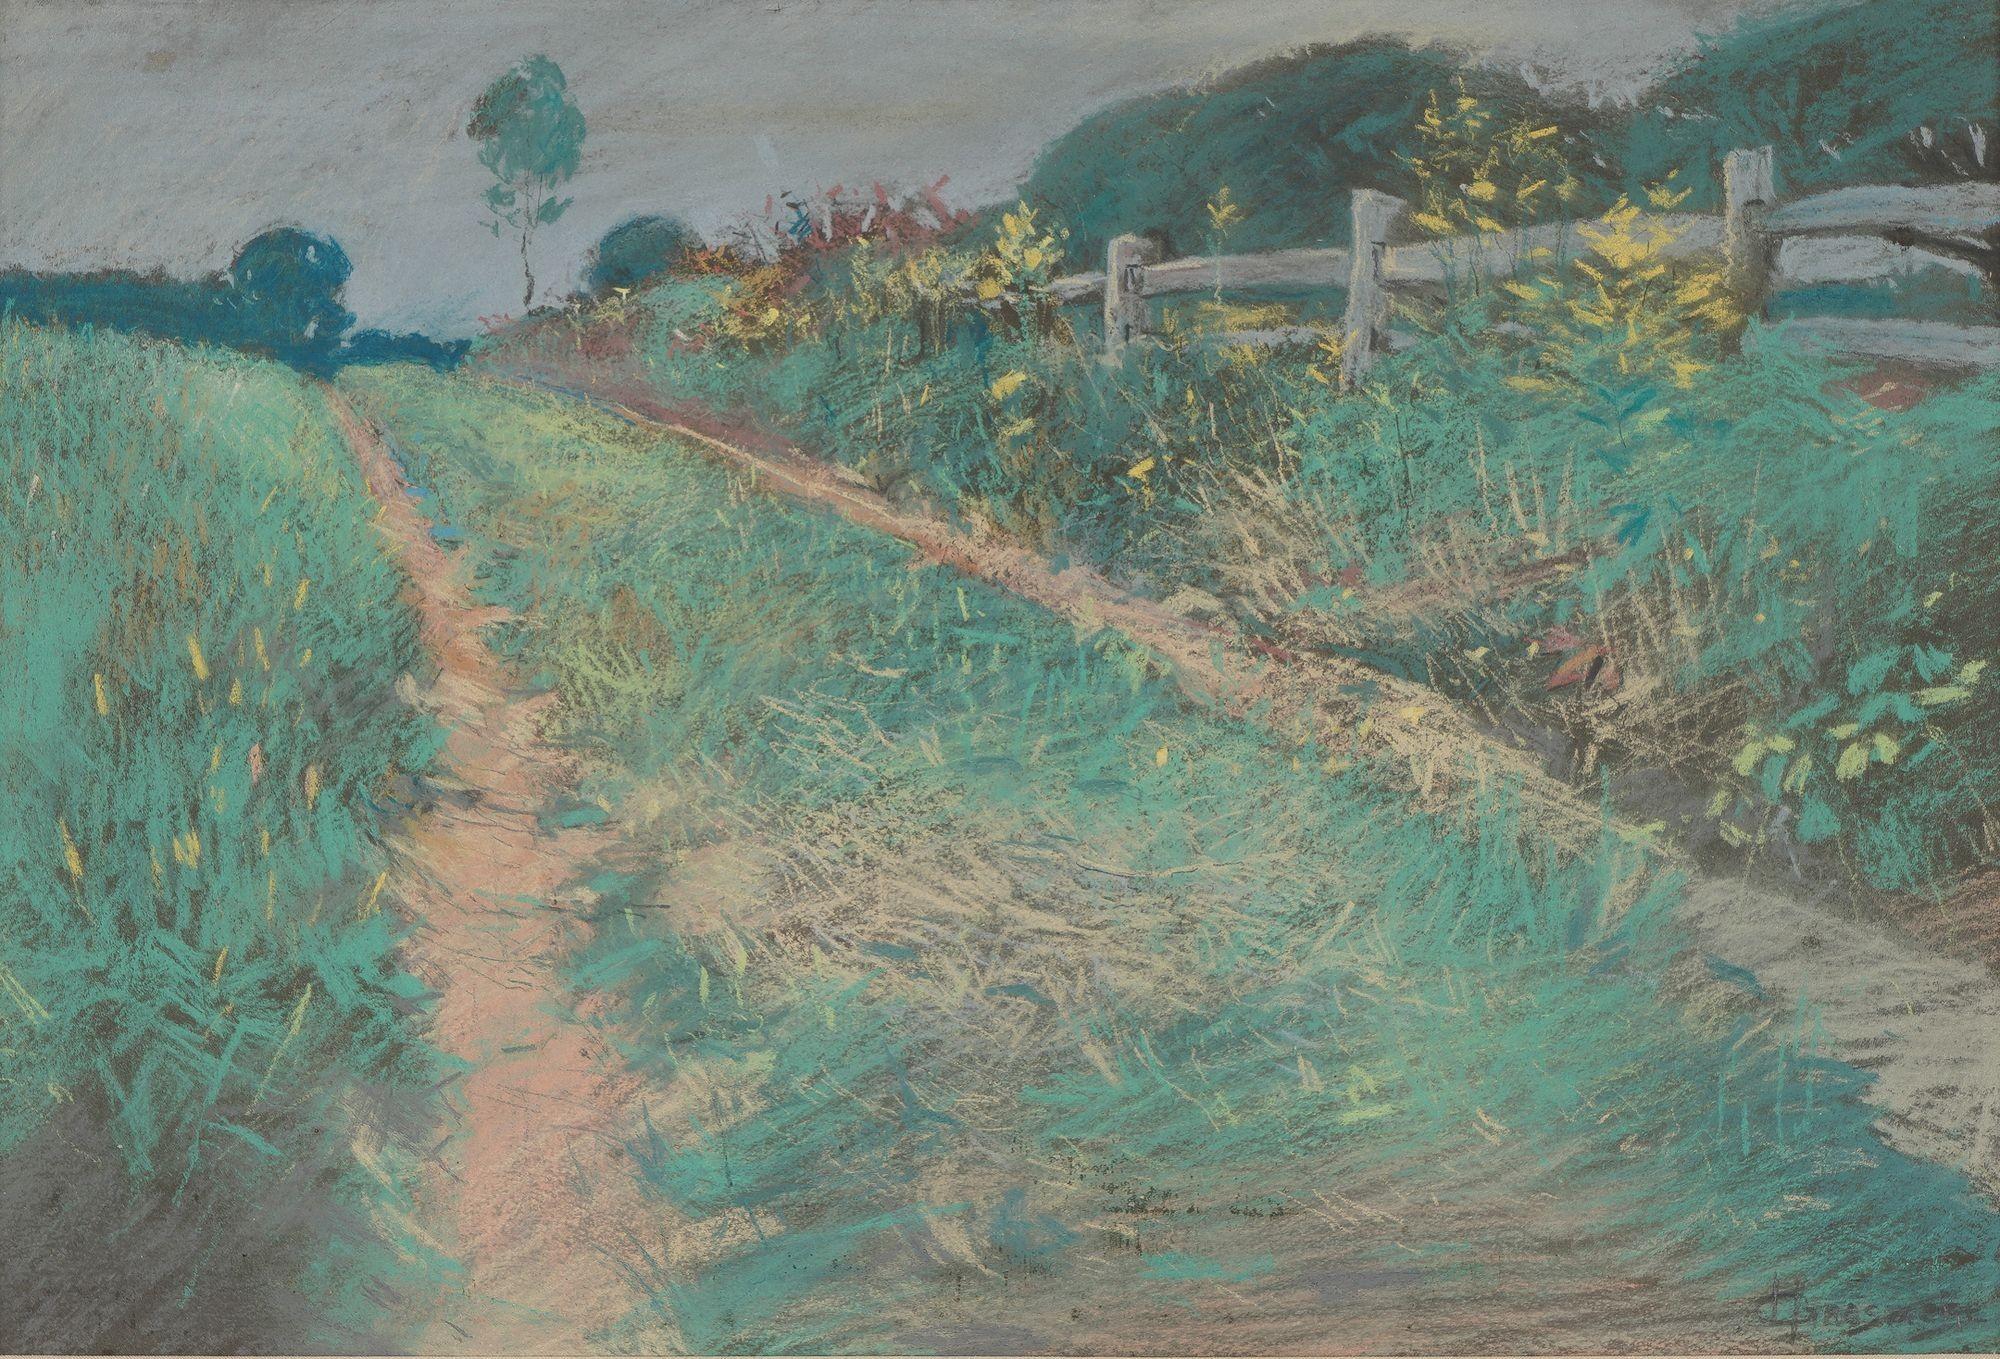 An accomplished Impressionist pastel on paper, summer landscape centering on a rutted lane bordering a split rail fence. The work is mounted on a silk mat and framed in a gold leaf molding style of the period. The signed name is unlisted in the